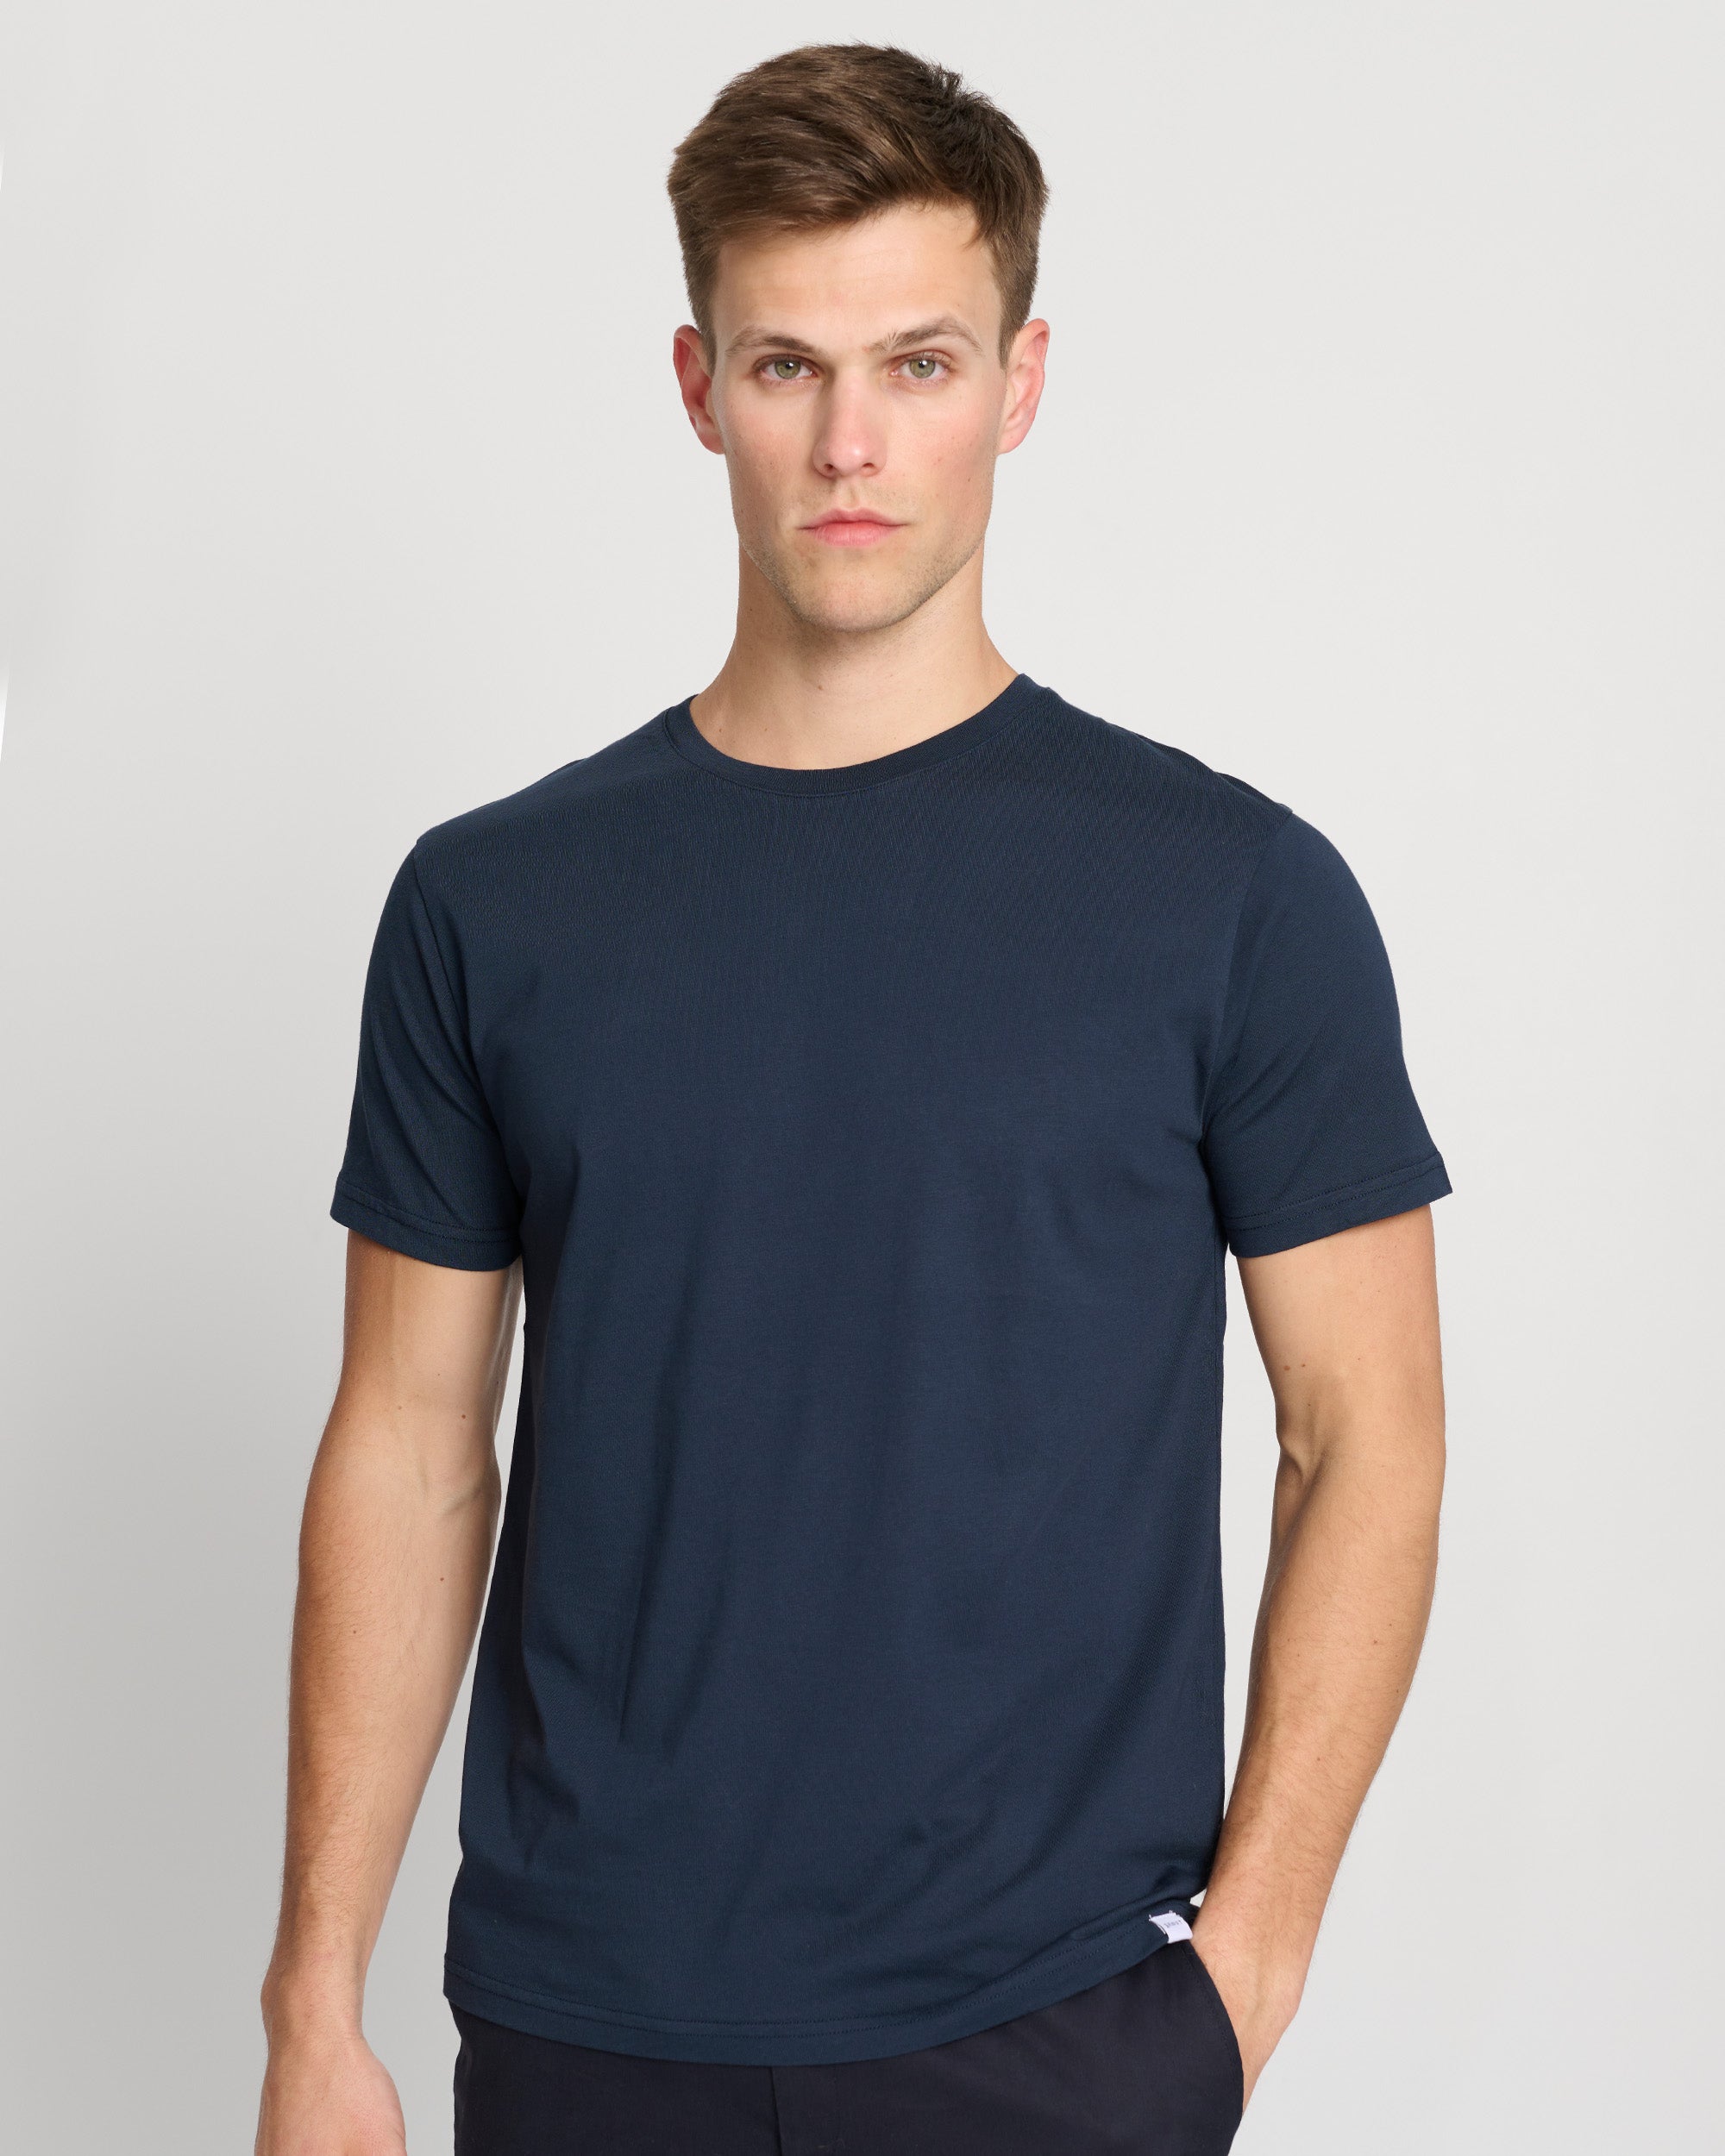 The Perfect T-Shirt for Men in Navy | Premium 185GSM Cotton